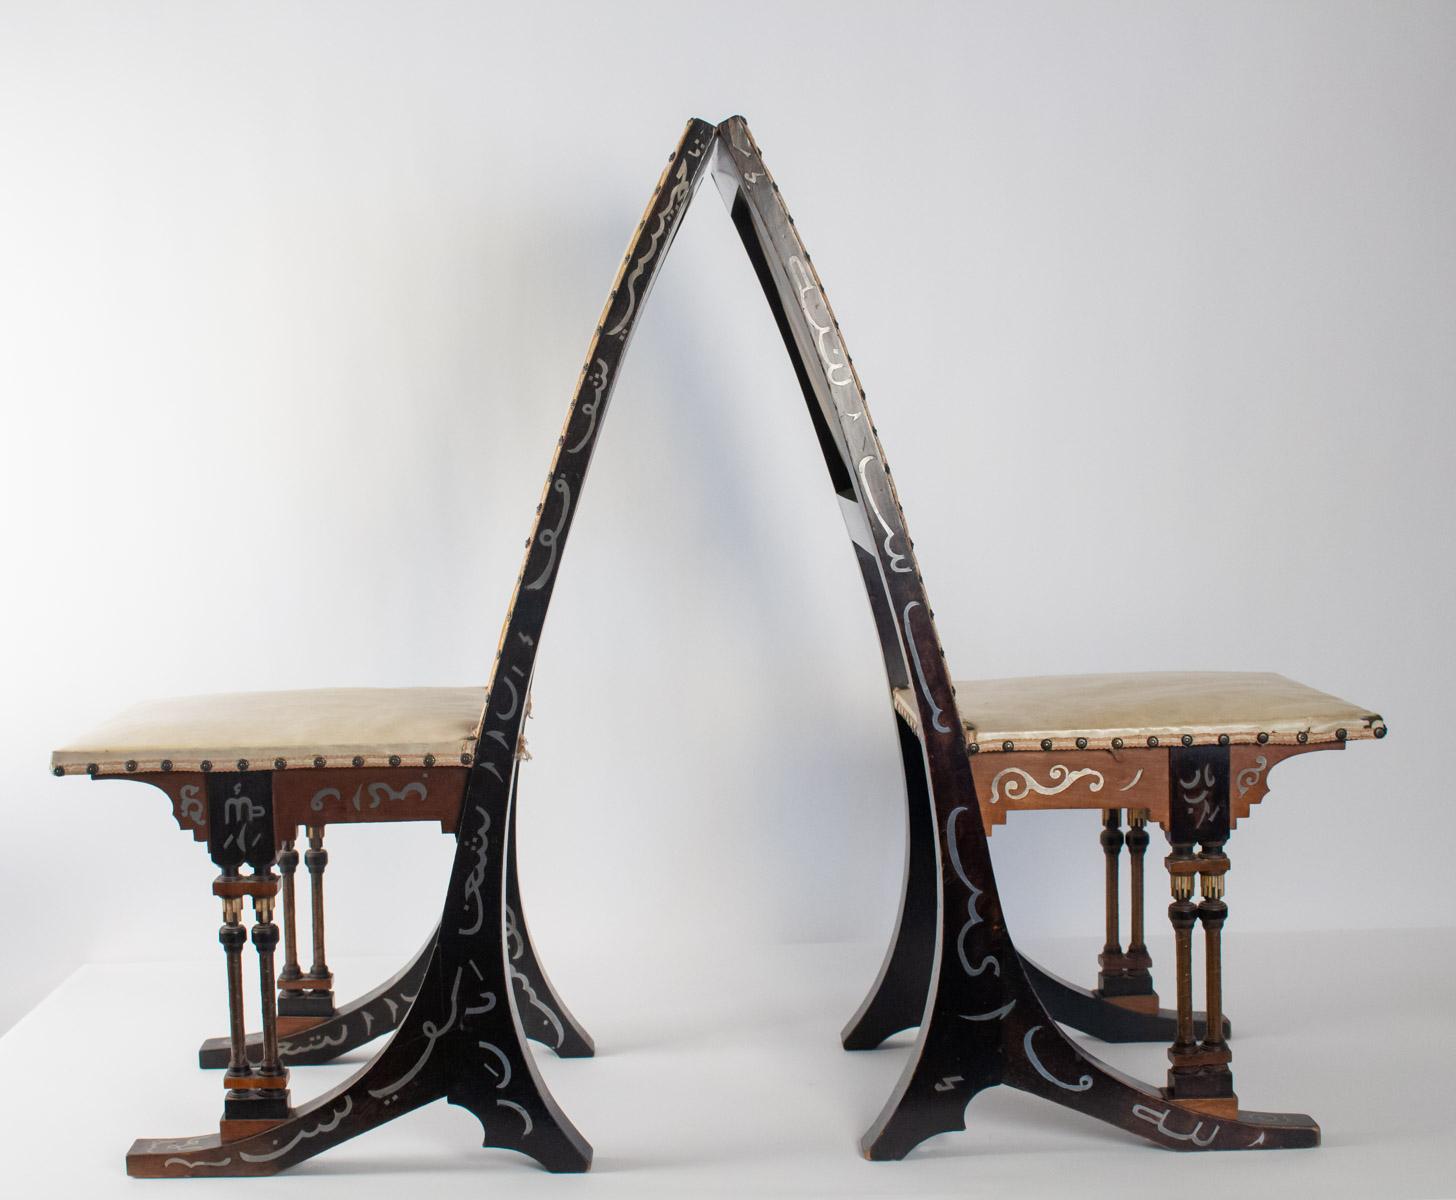 Pair of chairs from Carlo Bugatti, 1880-1890, wood, inlays of metal, copper, parchment.
Measures: H 95 cm, W 40 cm, W 42 cm.